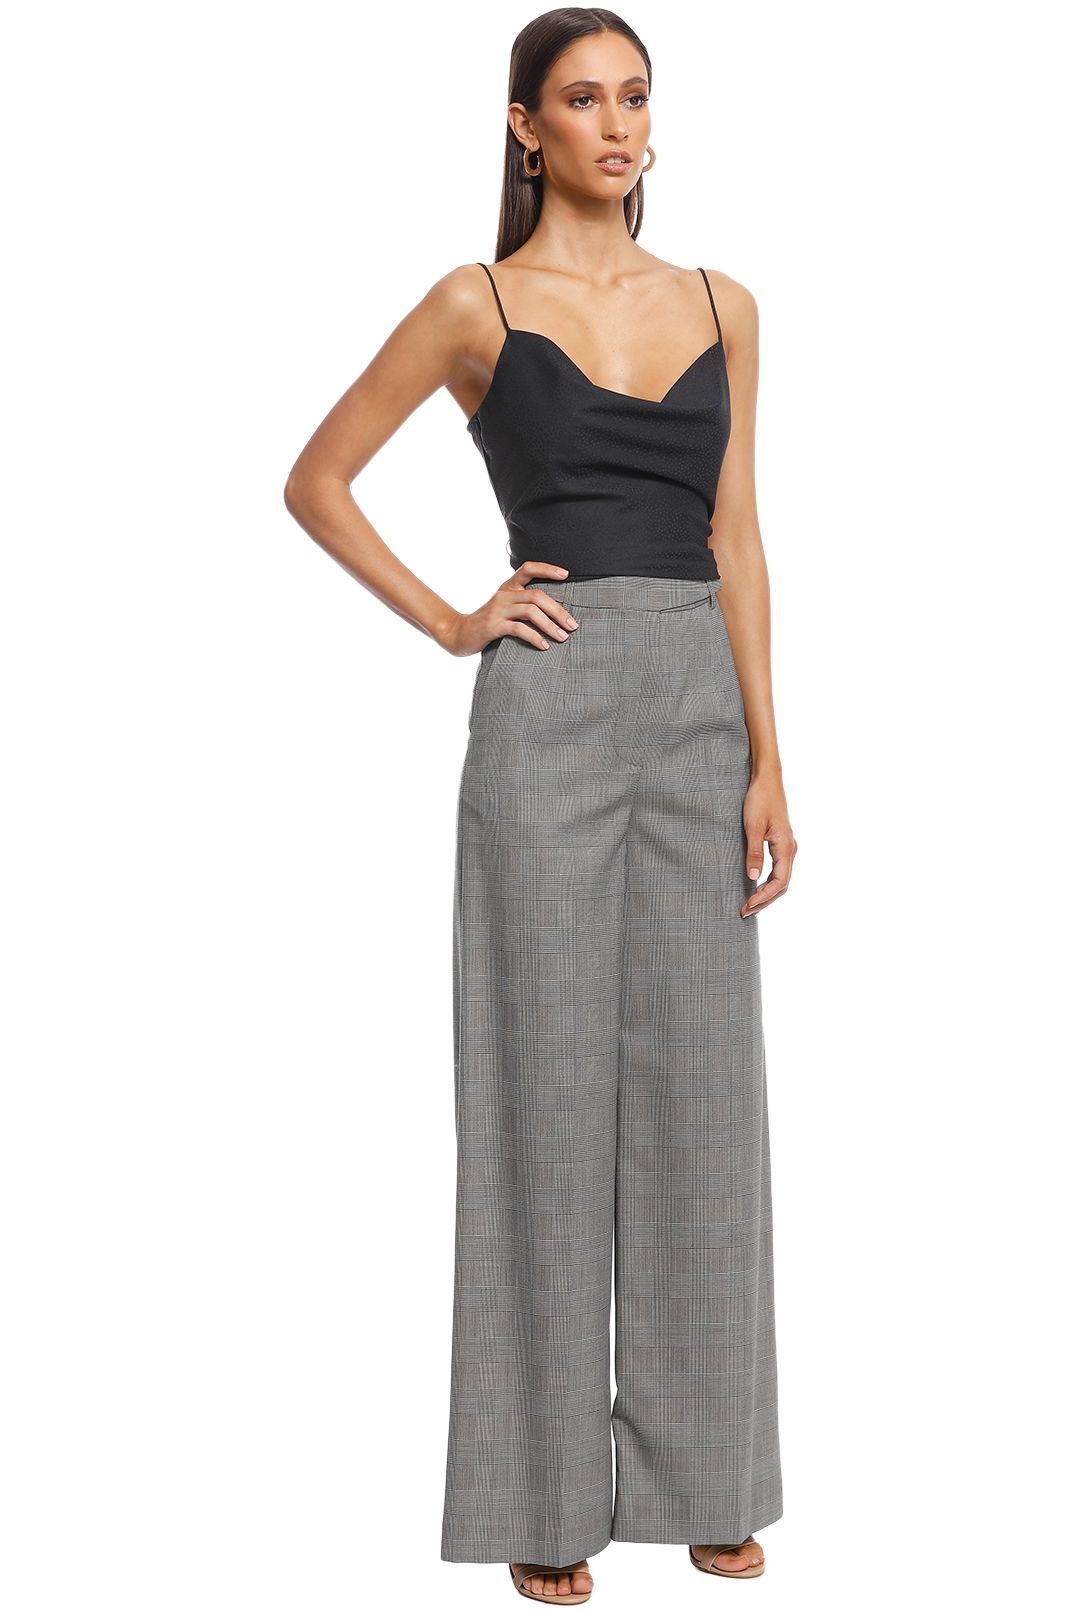 Camilla and Marc - Ackley Trouser - Grey - Side